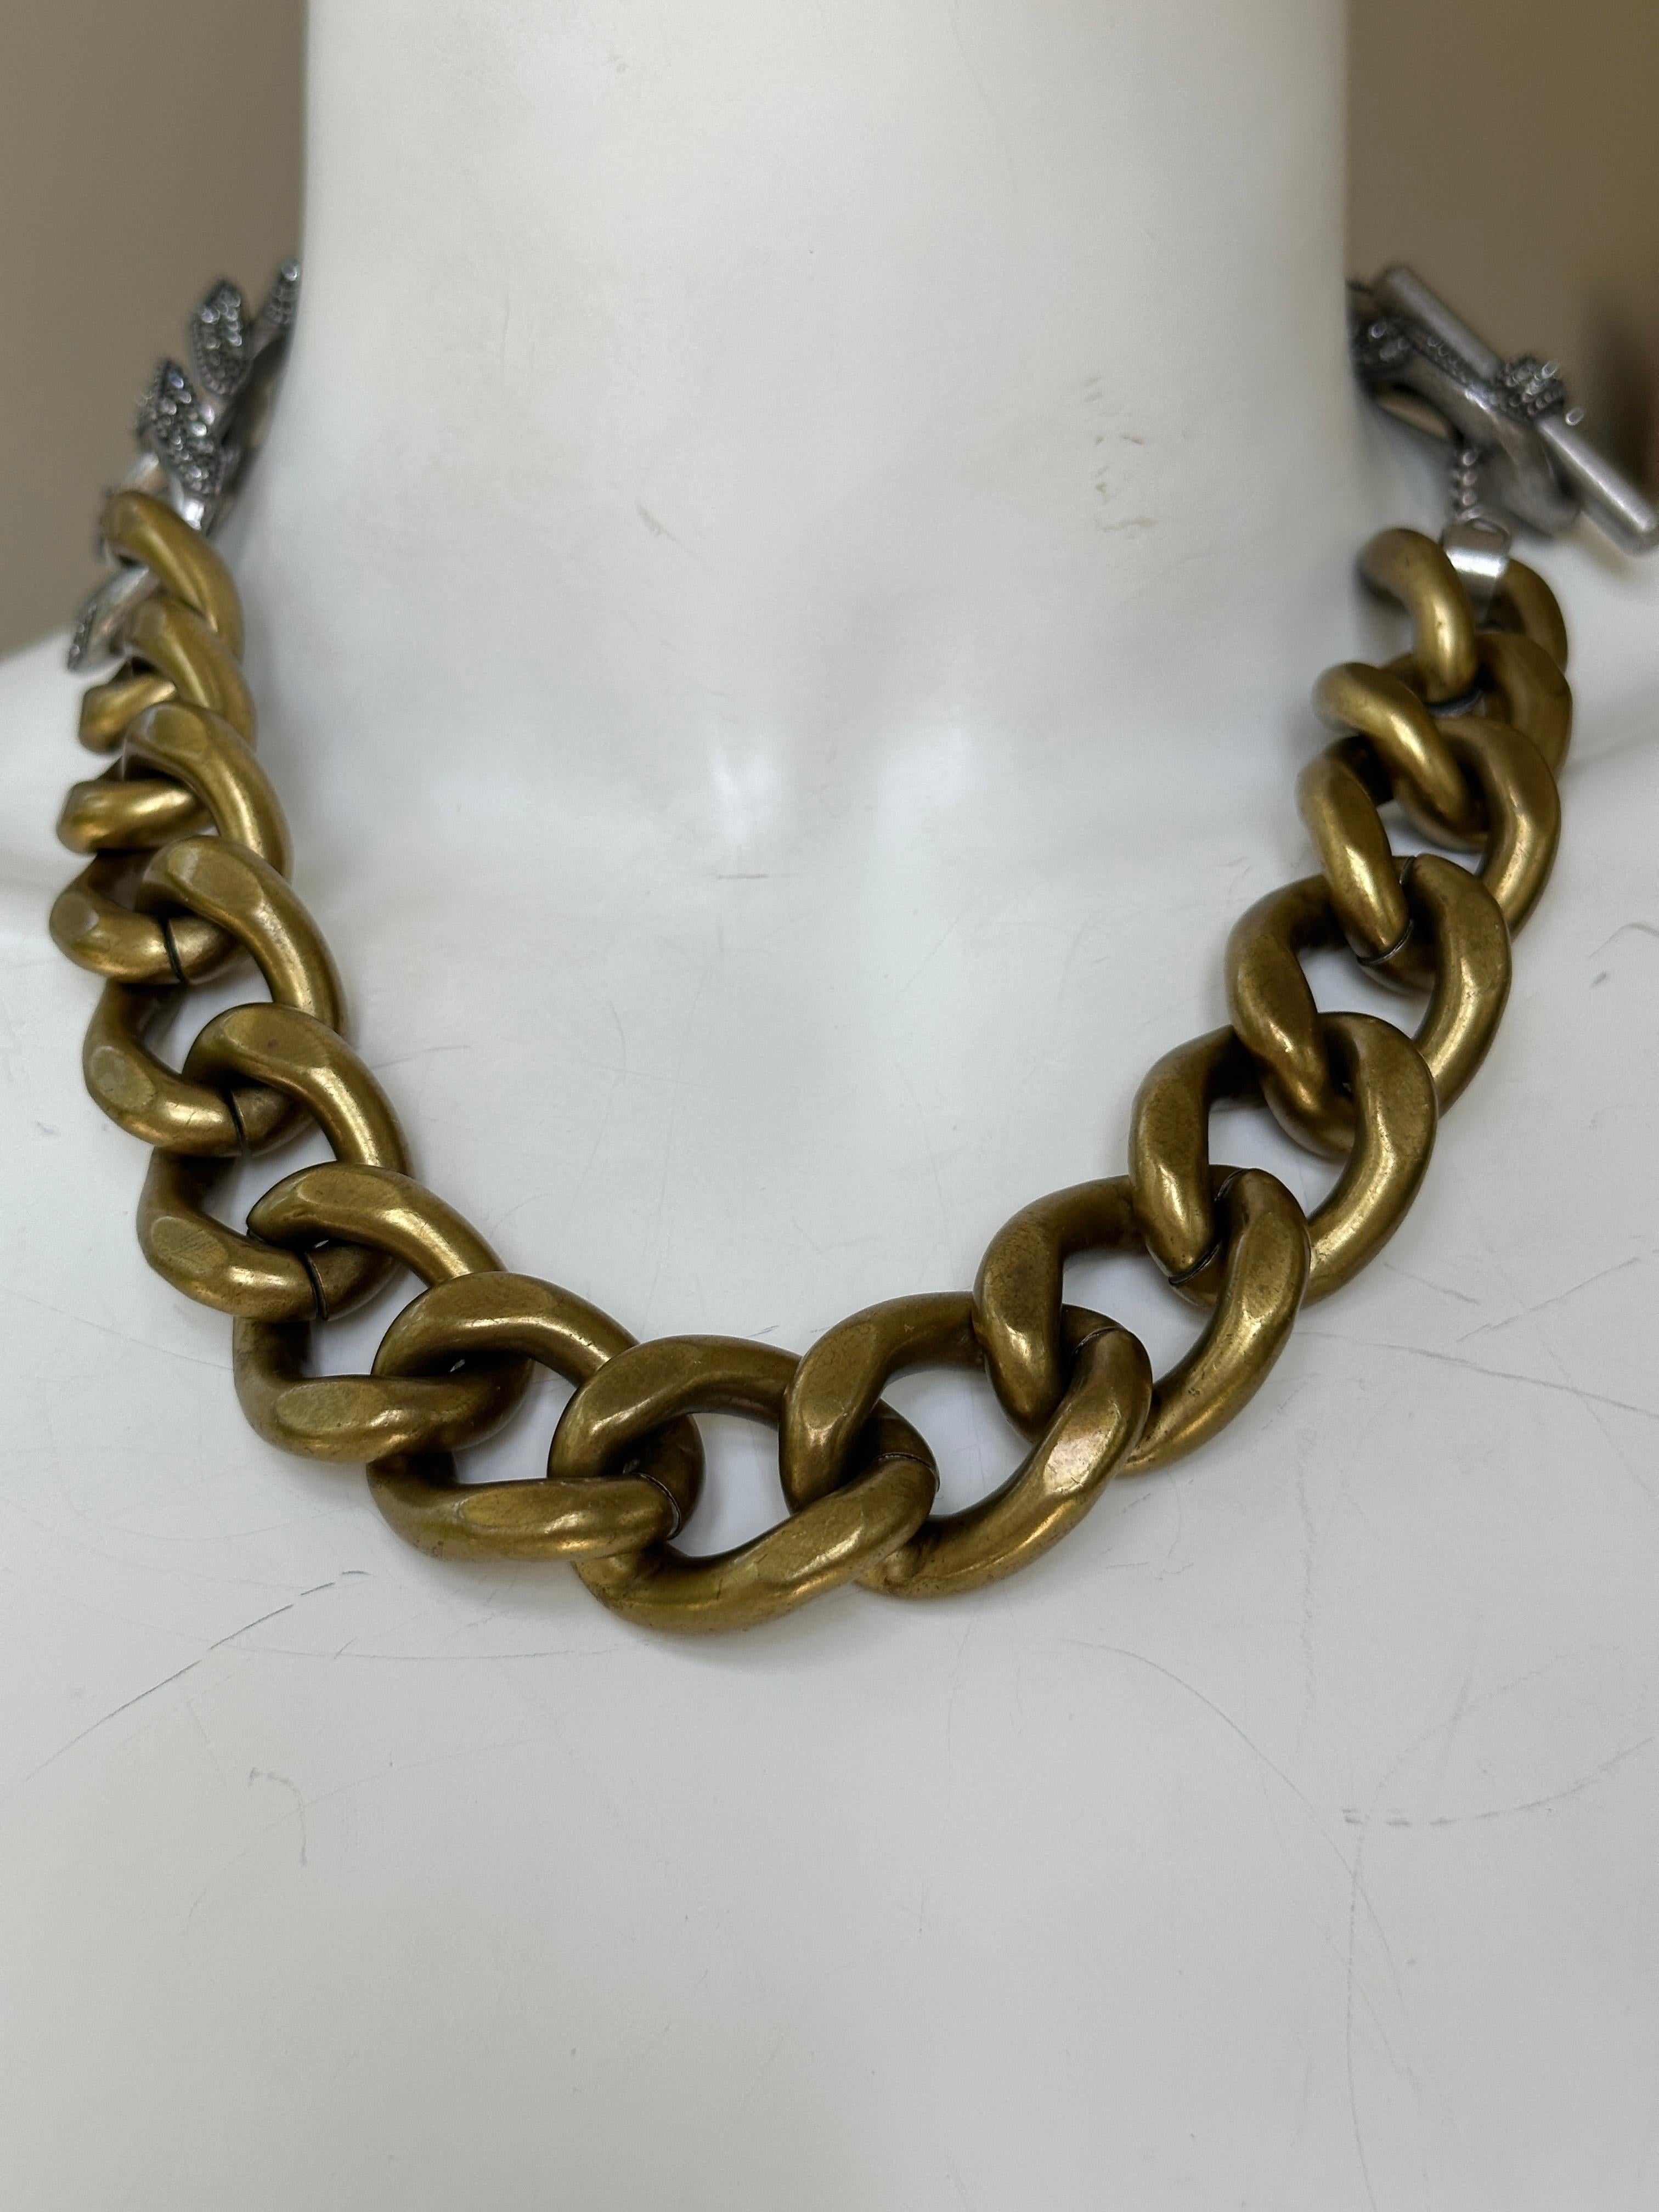 Lanvin by Alber Elbaz Chunky Two Tone Chain Necklace with Crystal Details In Excellent Condition For Sale In Cloverdale, CA